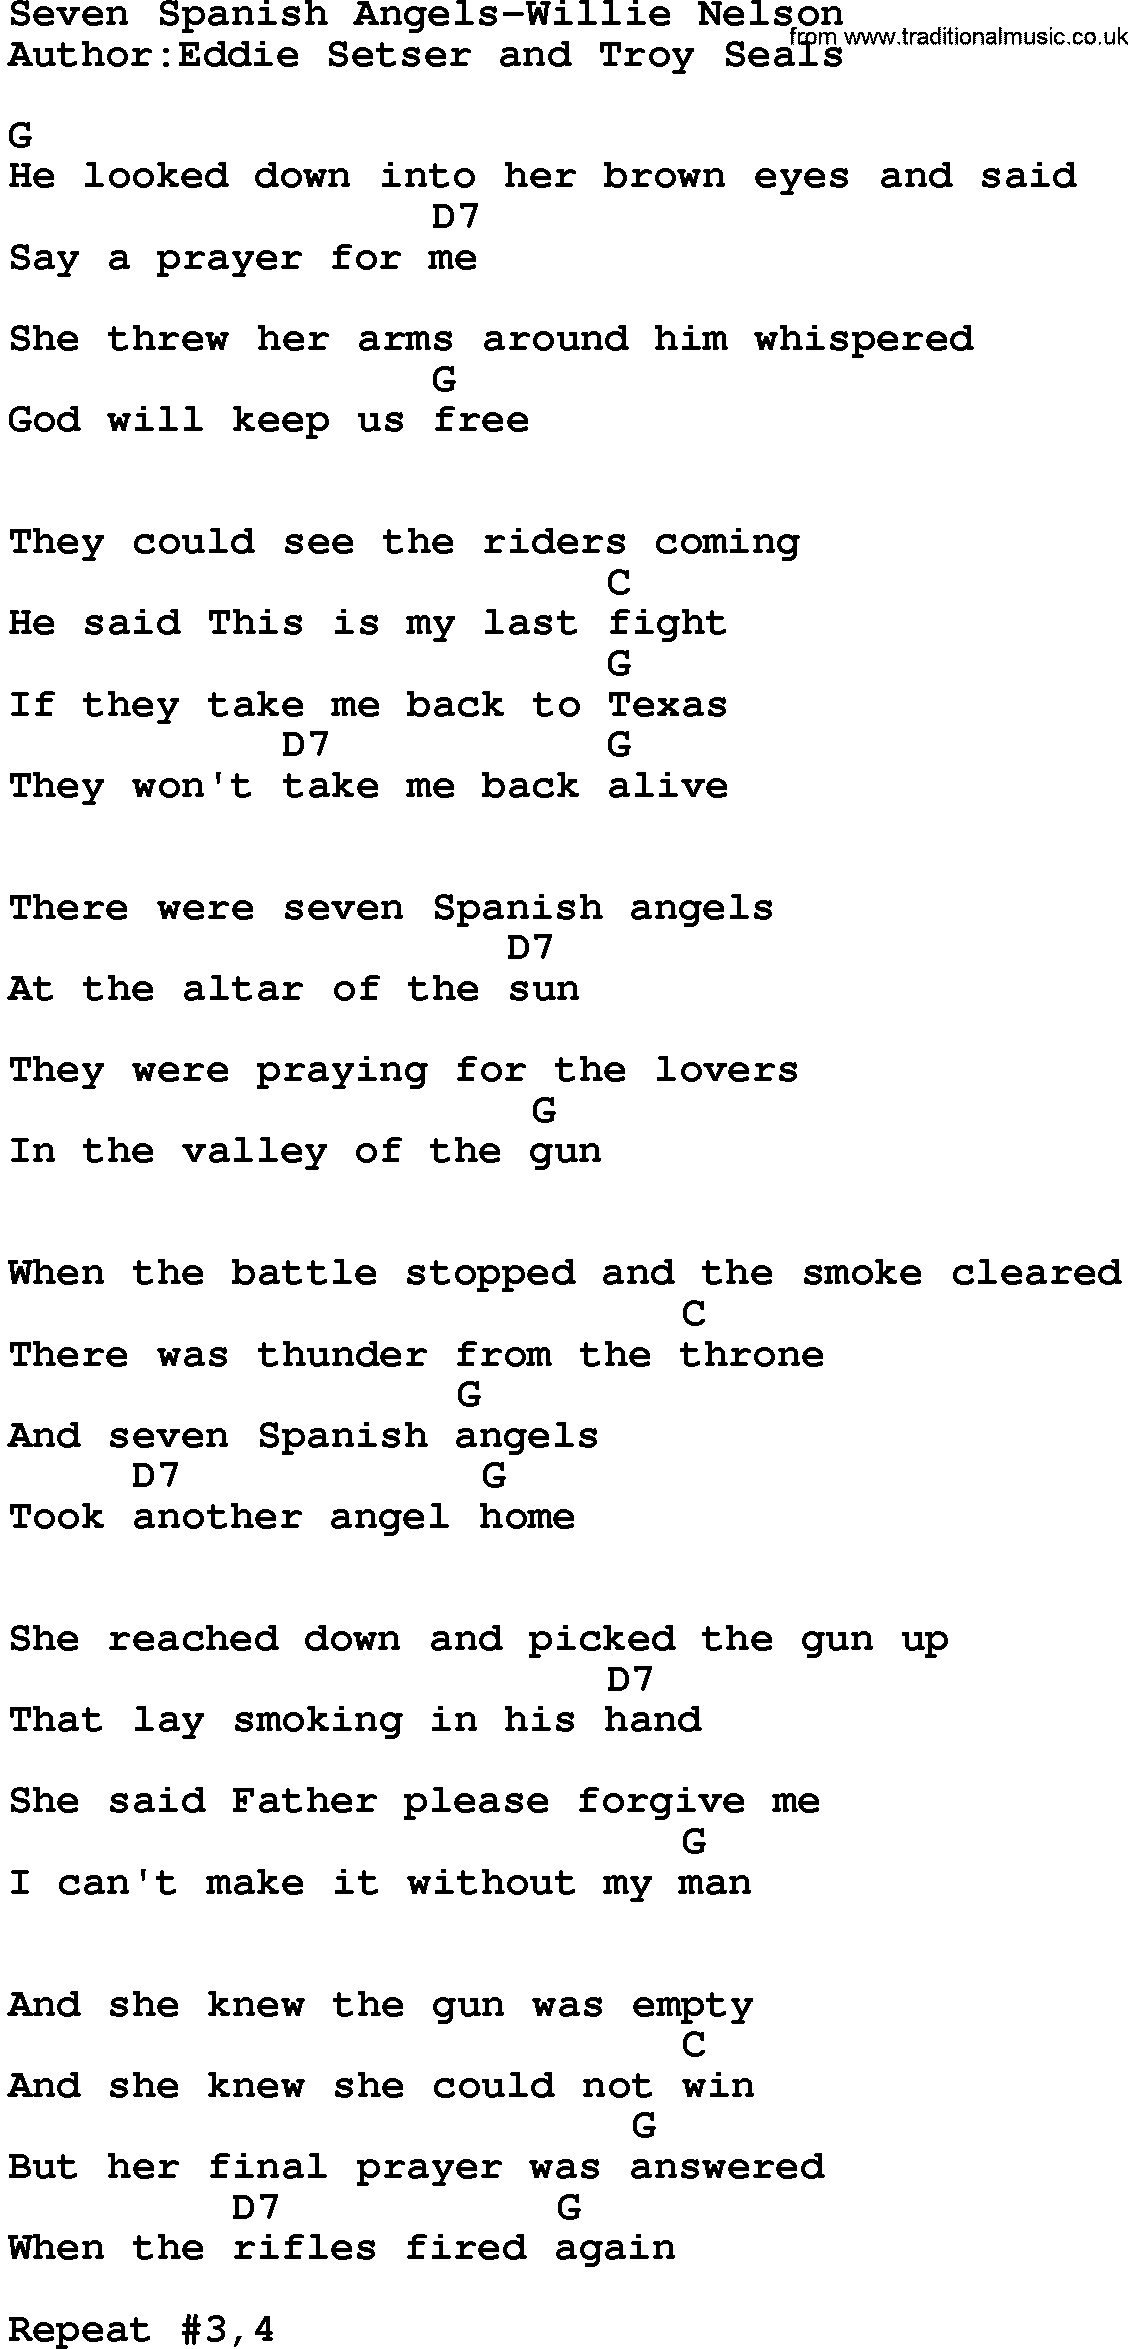 Not About Angels Chords Country Musicseven Spanish Angels Willie Nelson Lyrics And Chords